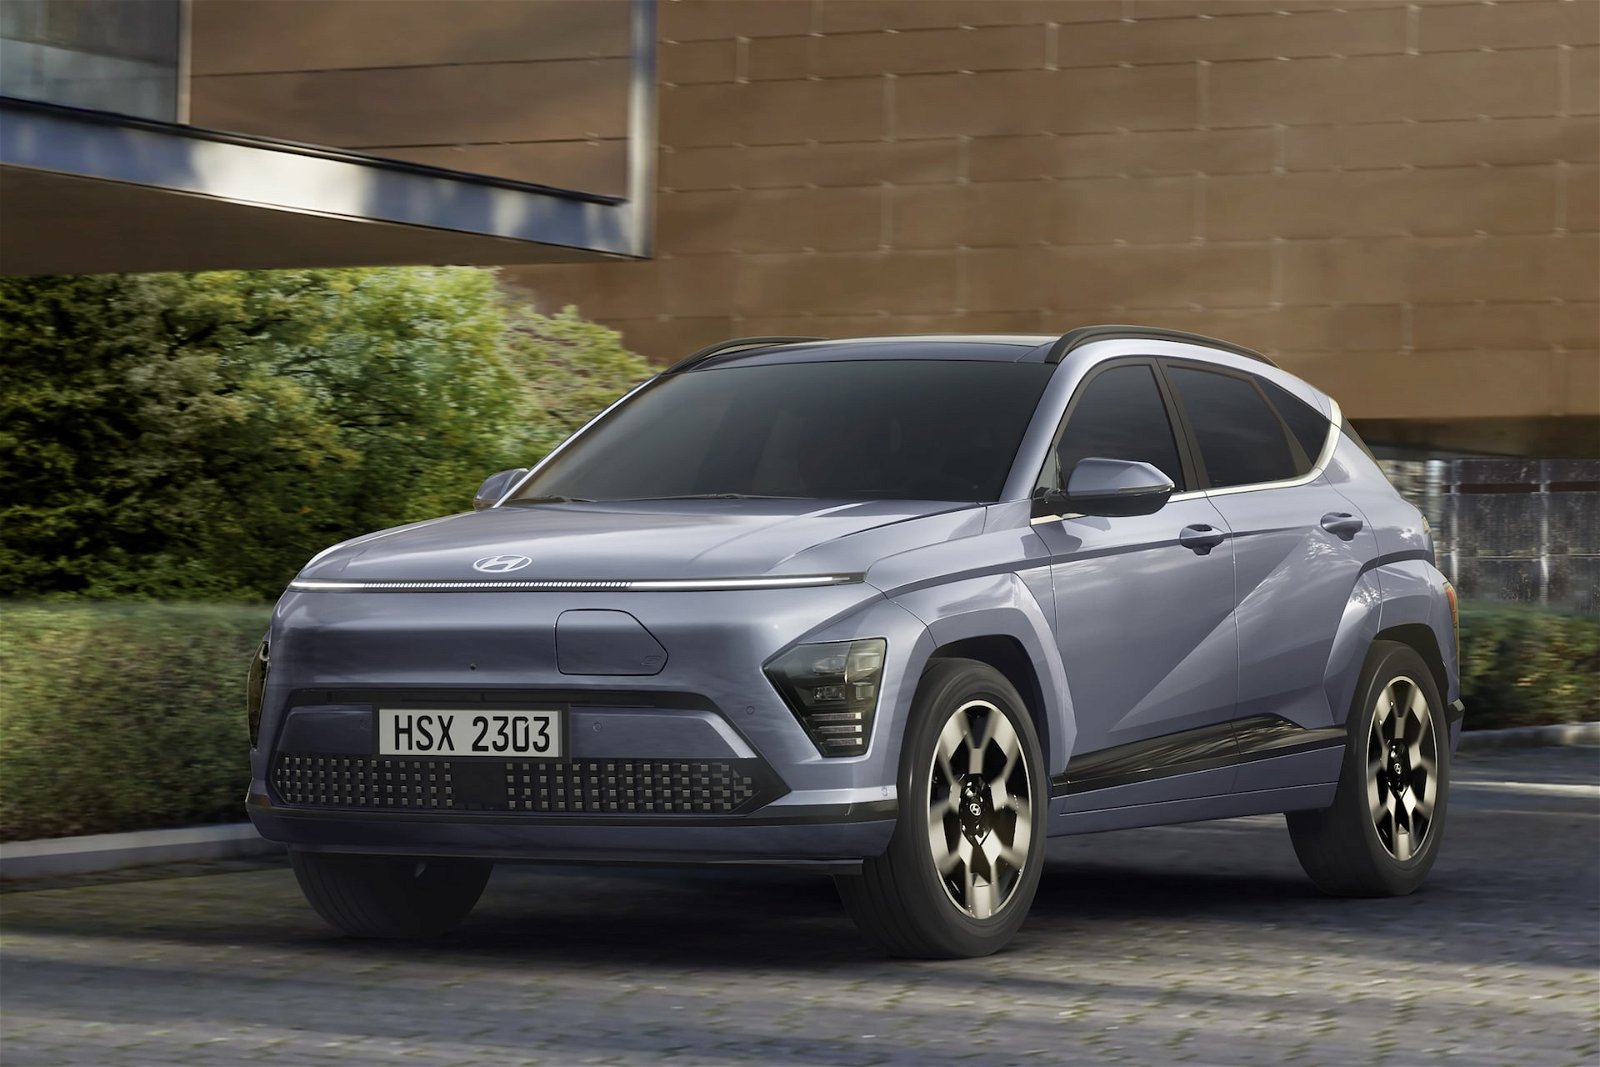 The front of the Hyundai Kona Electric Car